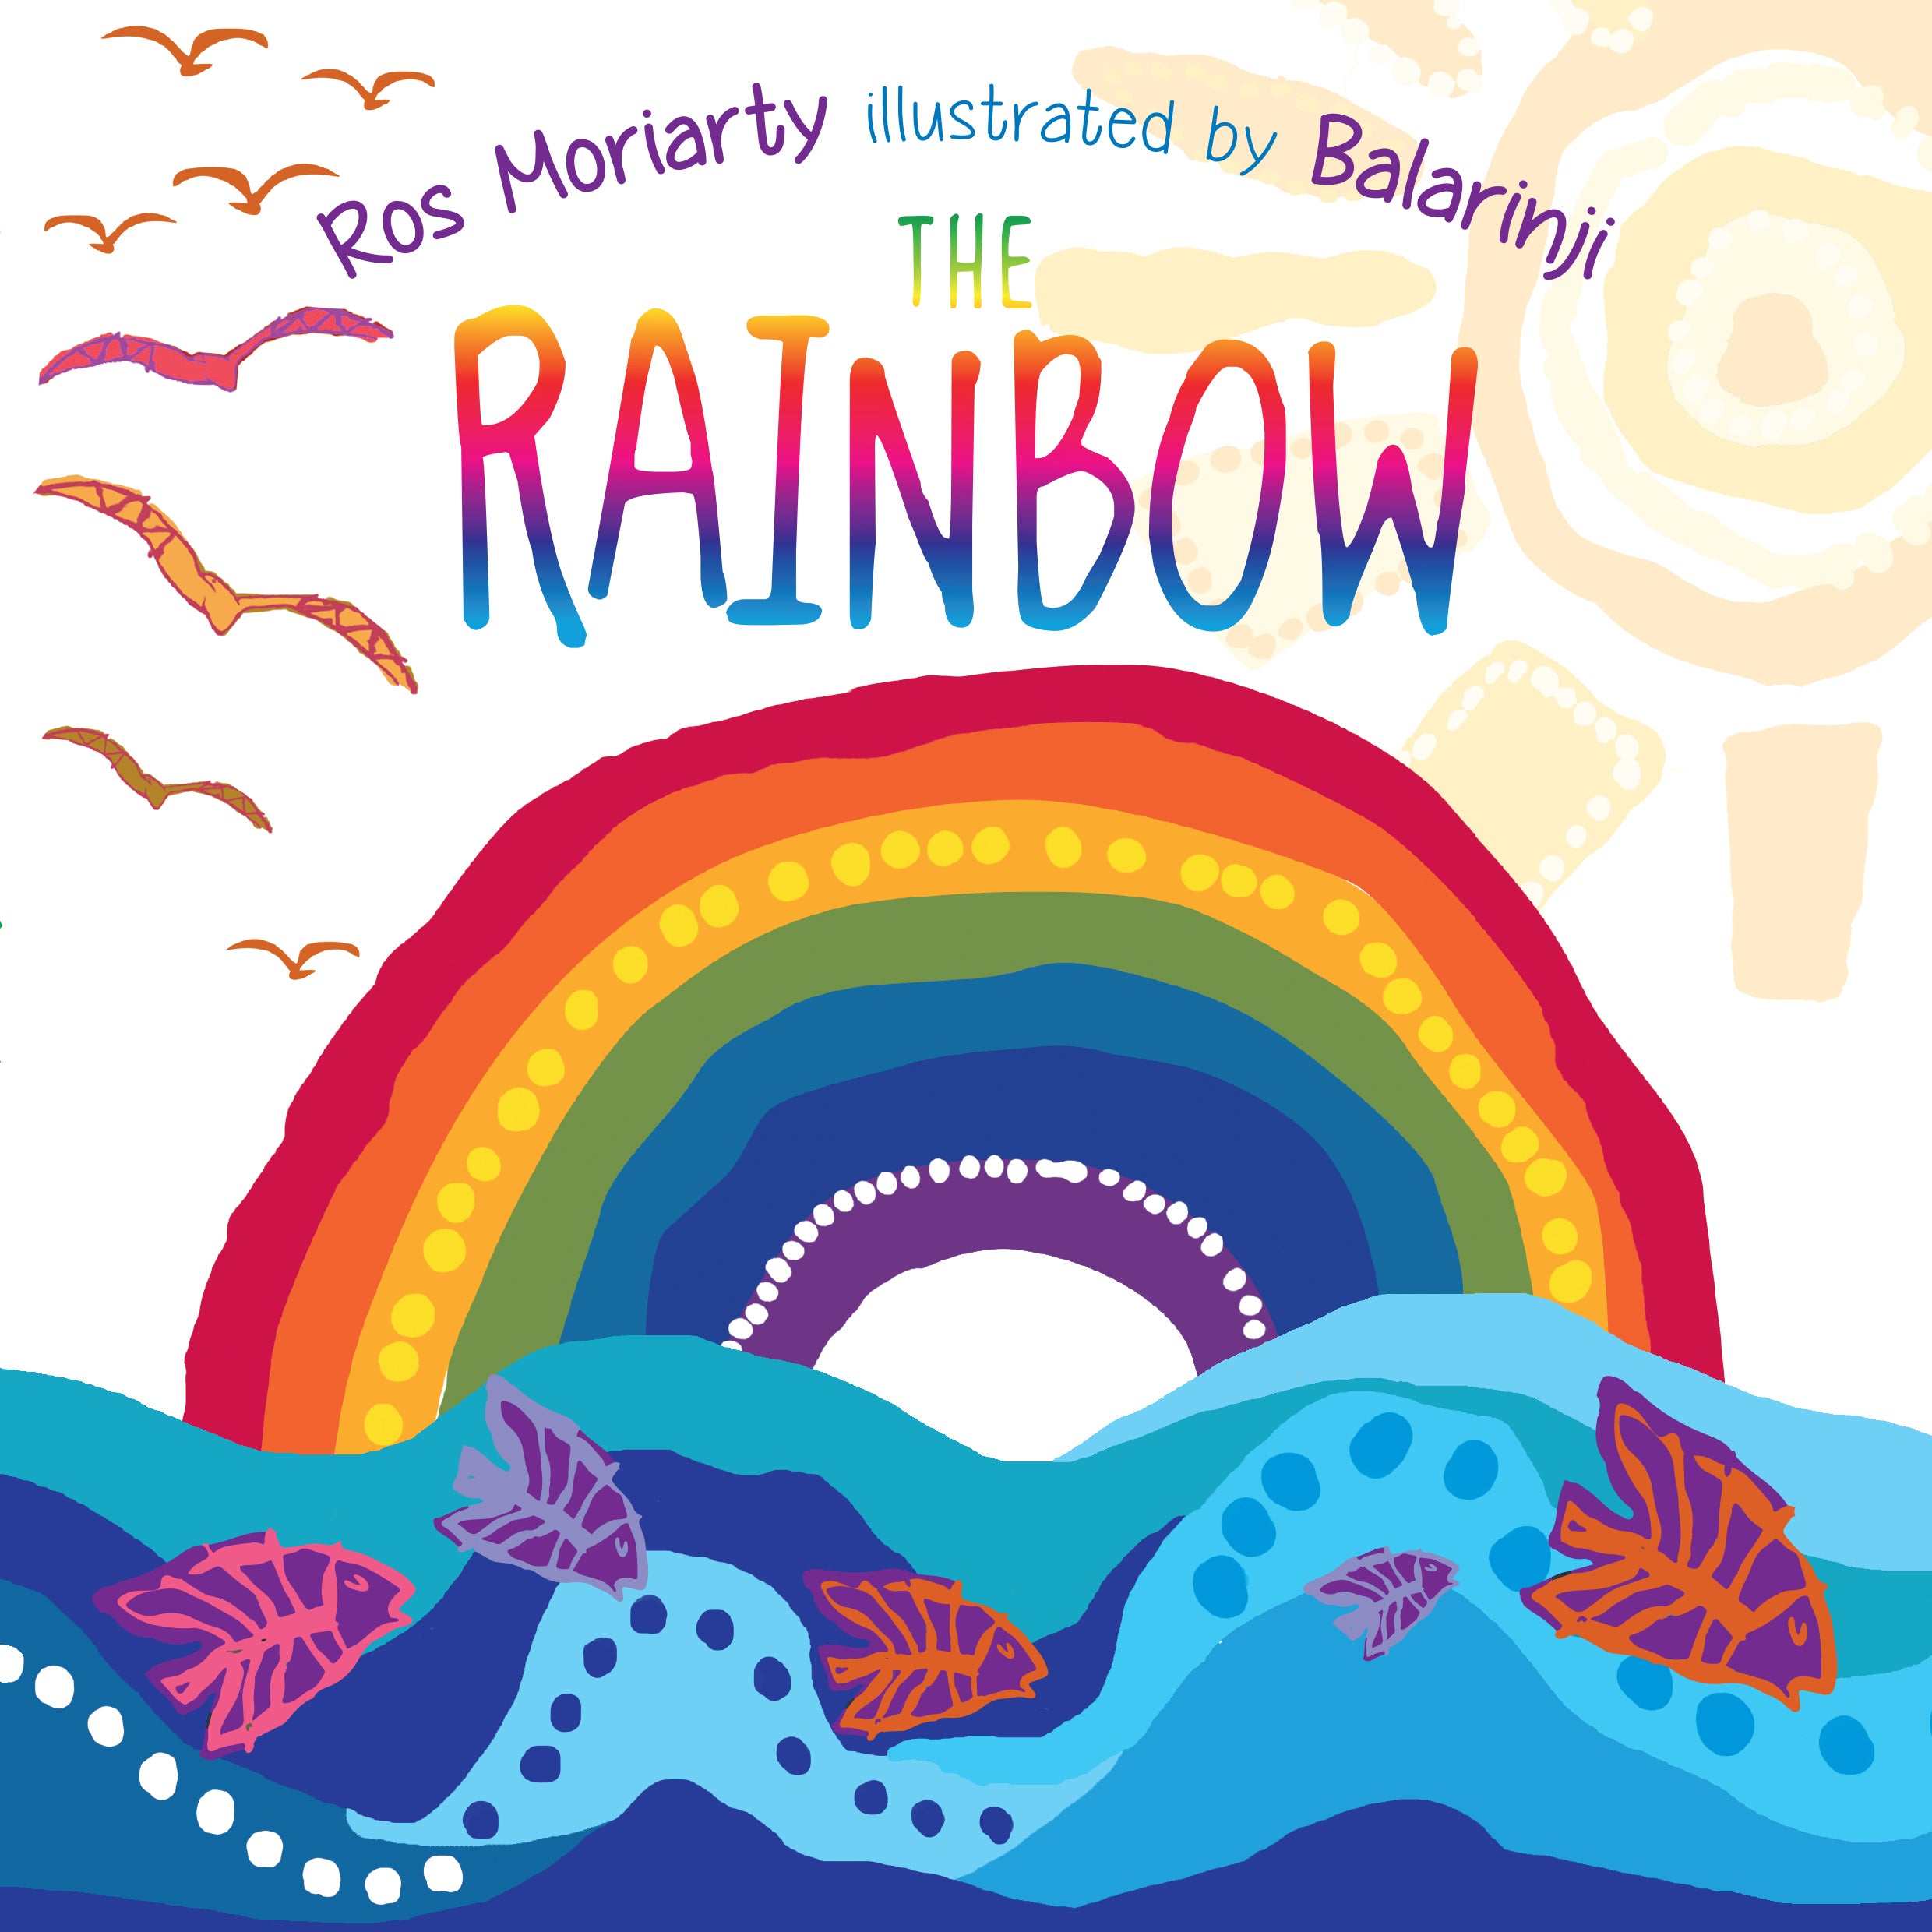 The Rainbow by Ros Moriarty, illustrated by Balarinji